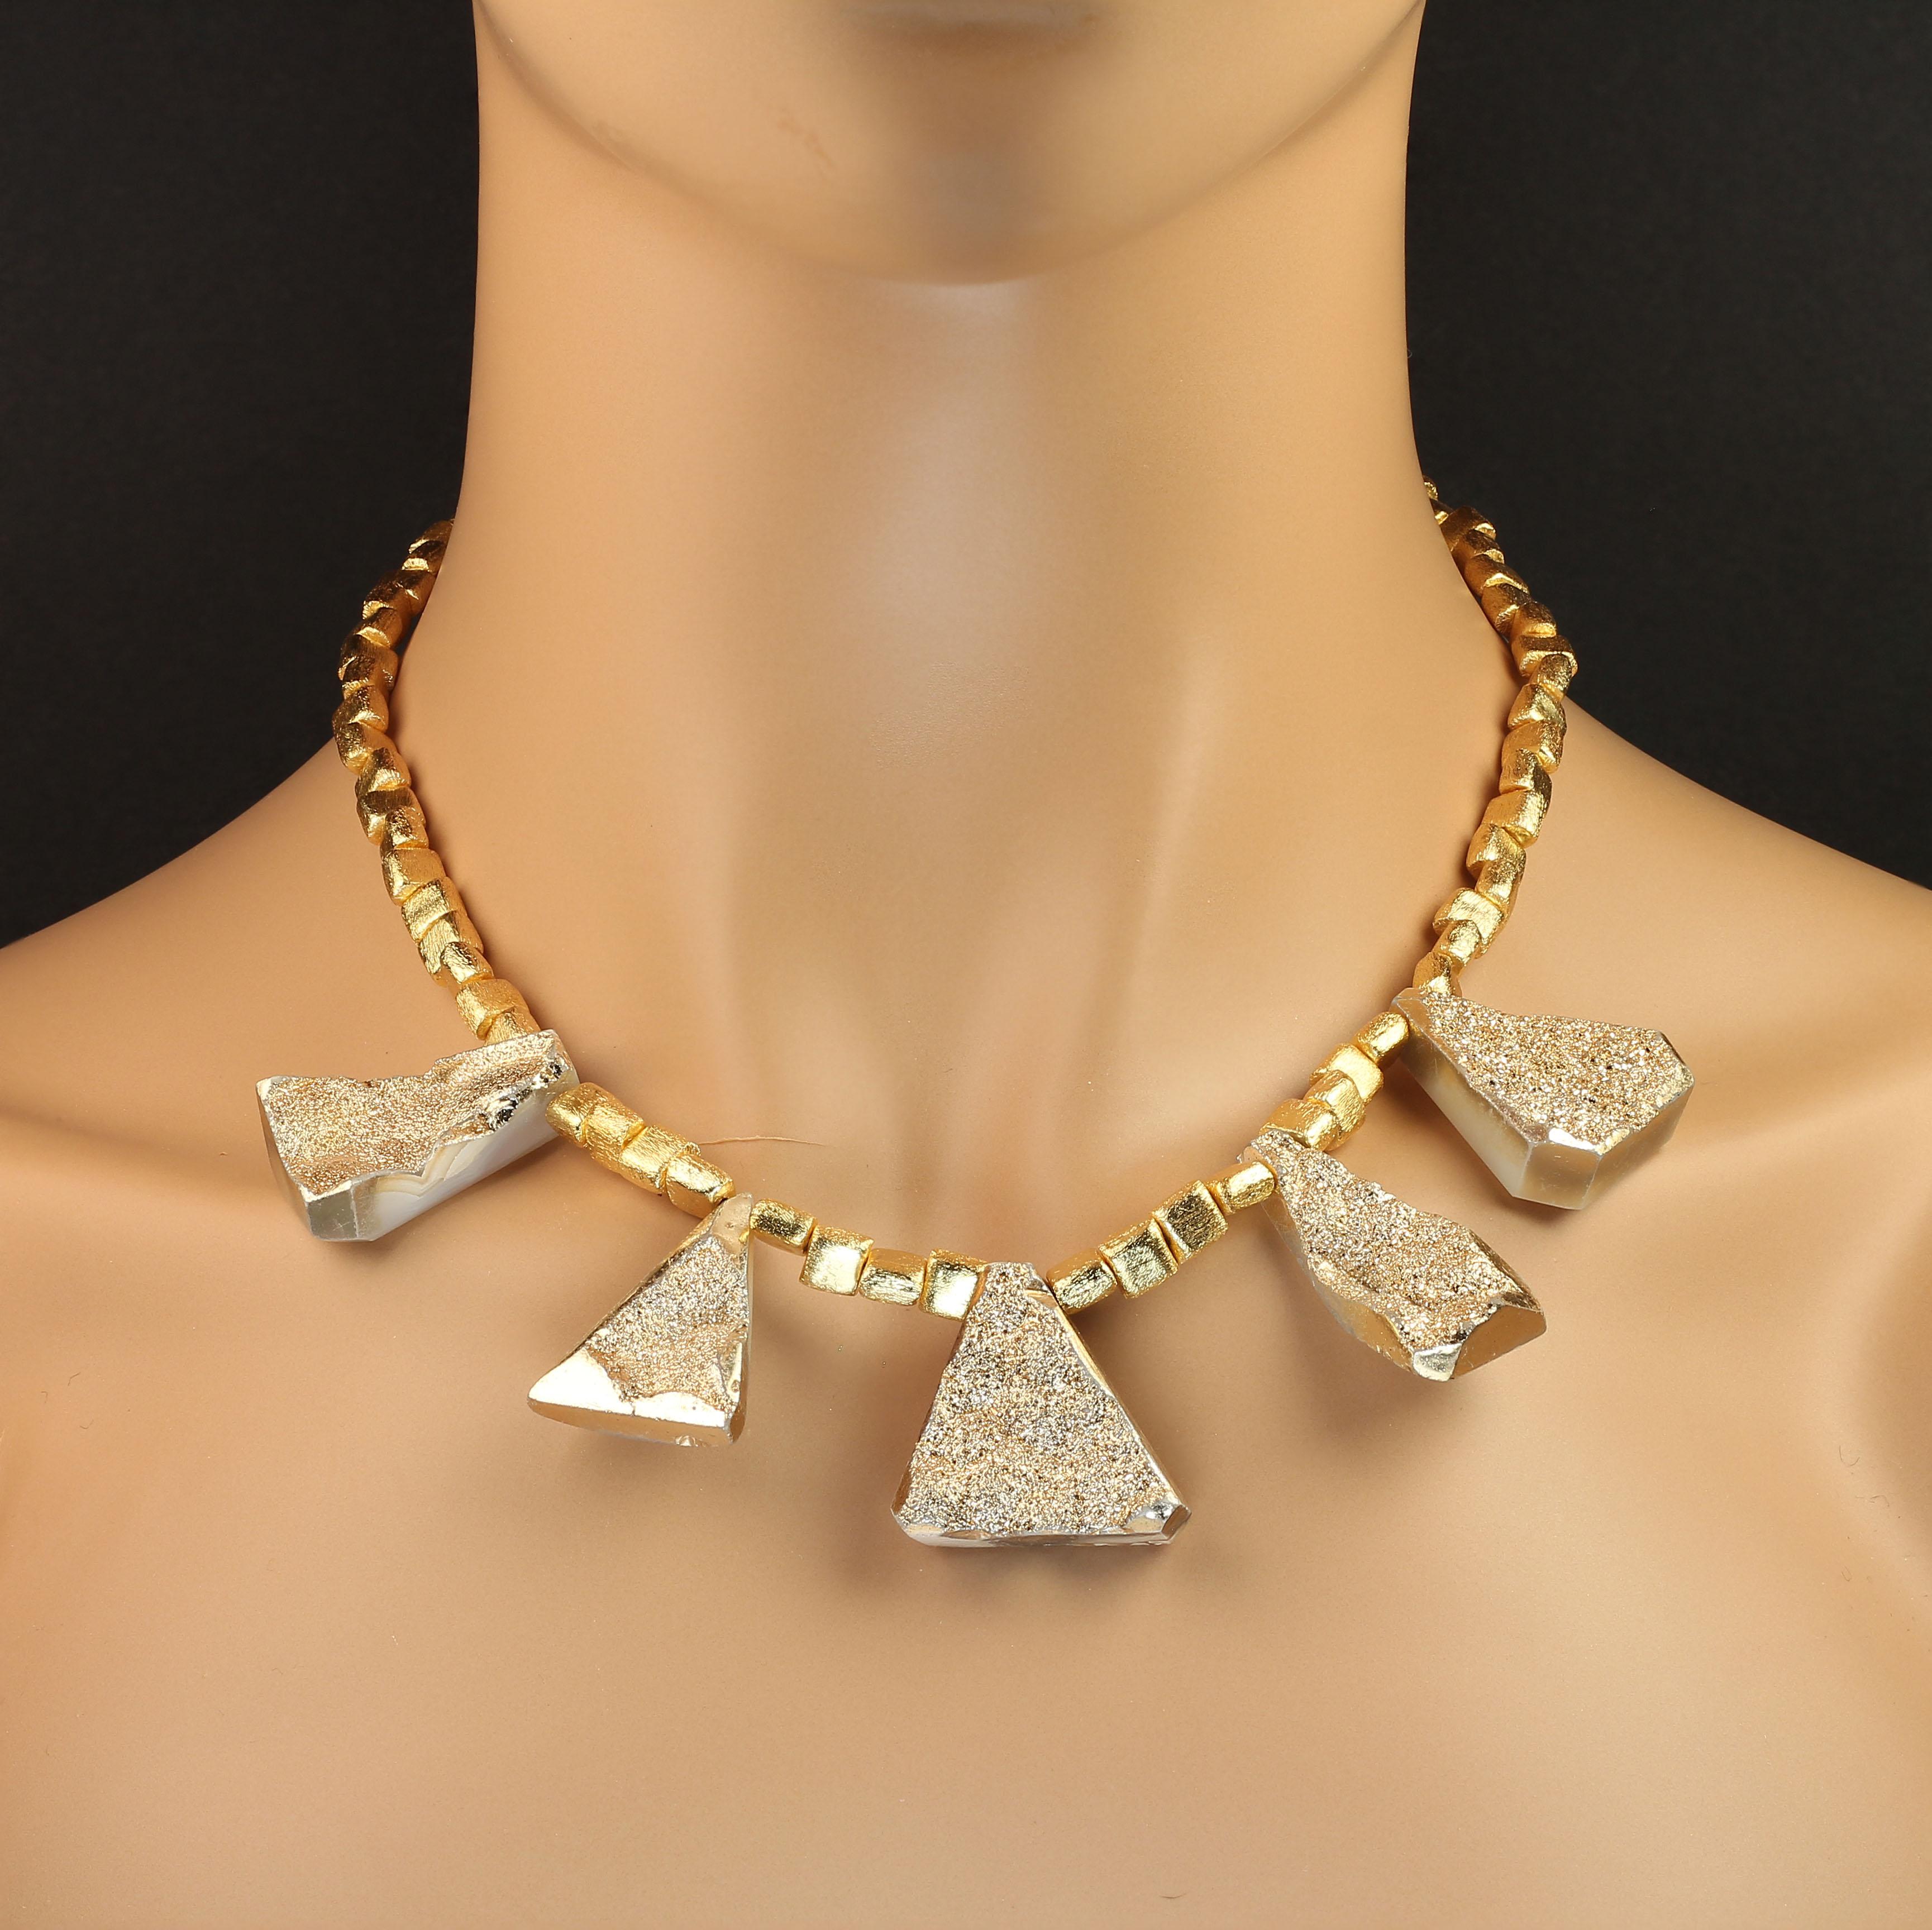 Holiday Sparkles of Five Golden Druzy Triangles dangling from shiny gold tone square beads. Sparkle and Pop your way through the Holiday Season with this Glittering Necklace. This necklace with light up any ensemble, put it on black, put it on red,